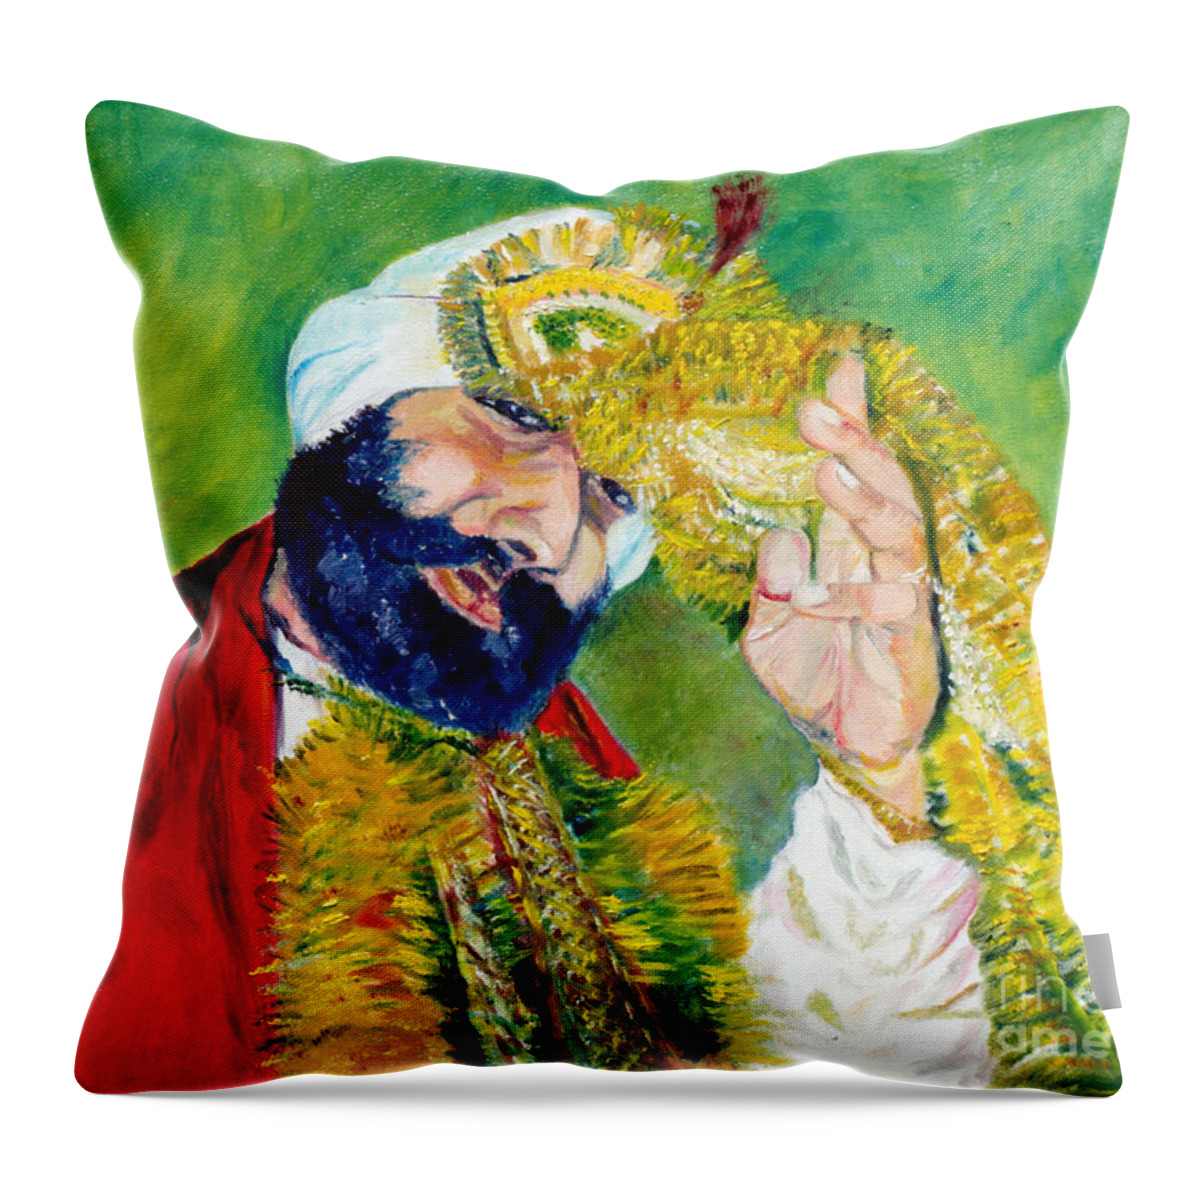 Groom Throw Pillow featuring the painting The Sikh groom by Sarabjit Singh